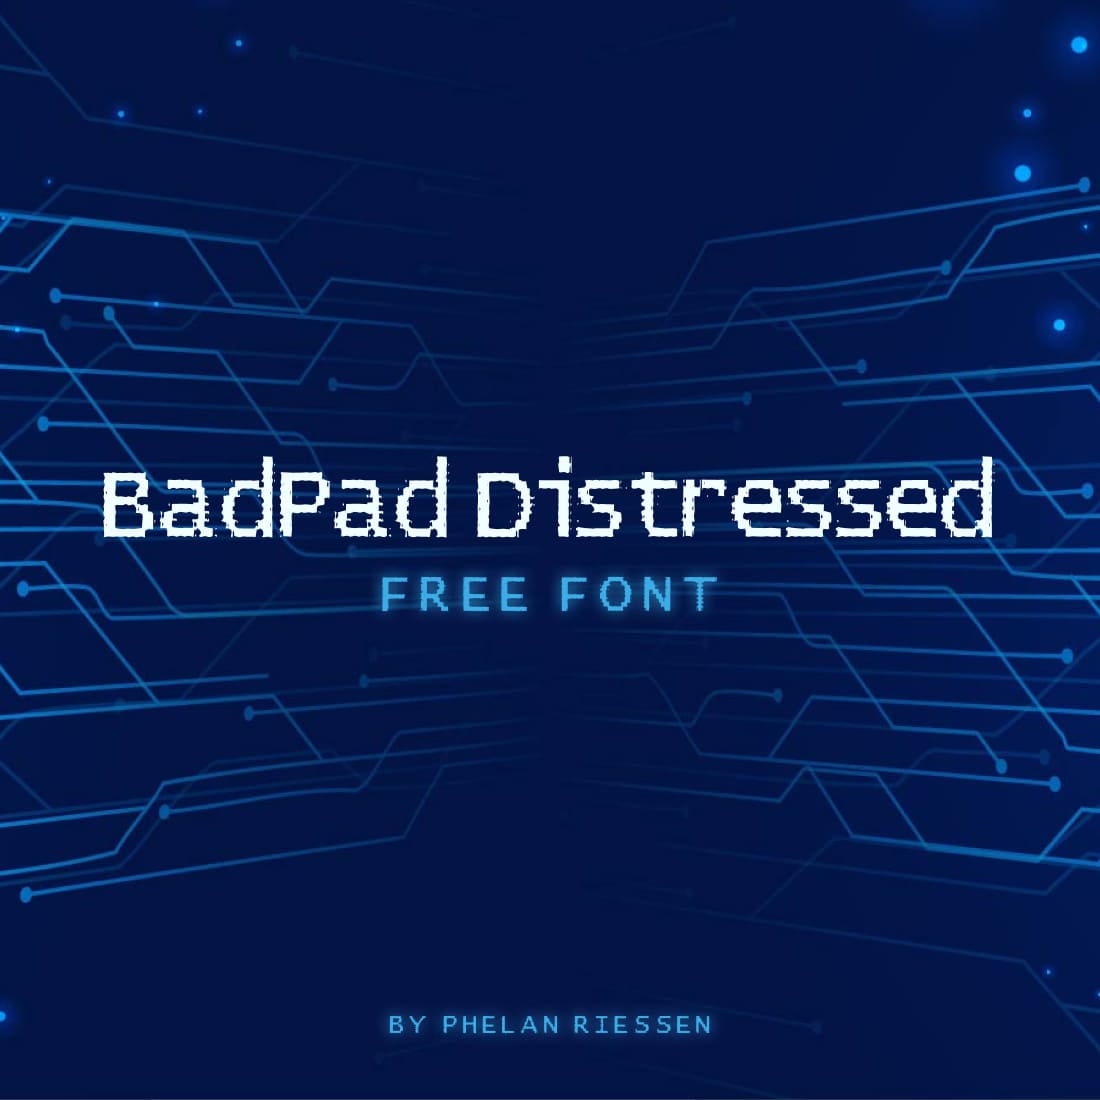 Free BadPad Distressed Font Blue Cover Preview by MasterBundles.